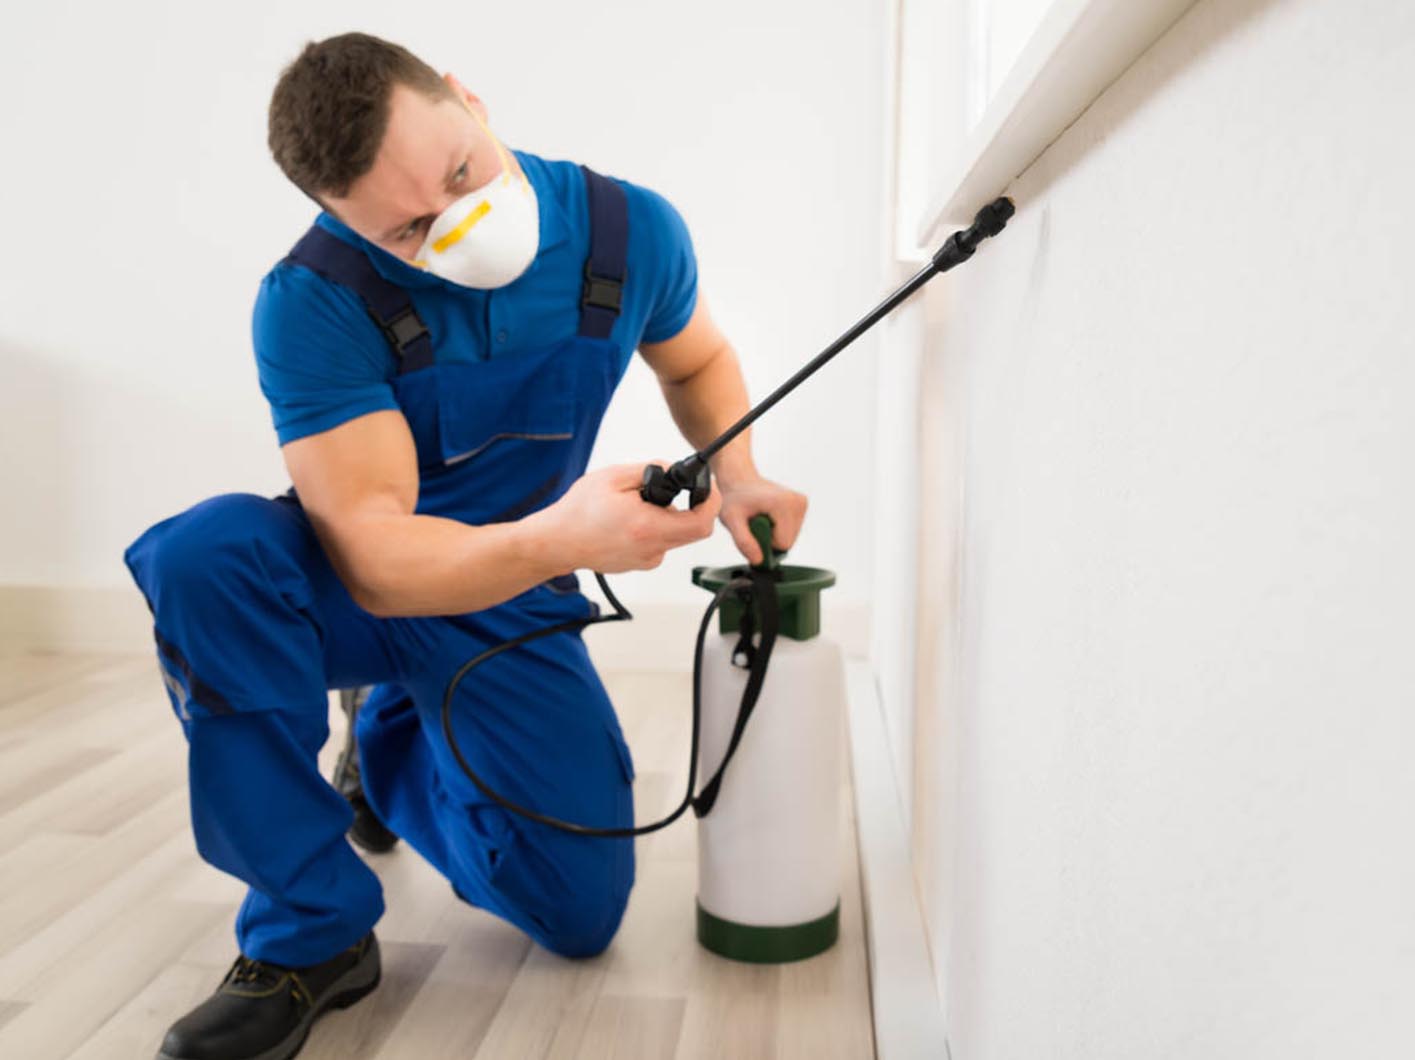 Contact Pest Control Services: Get Rid of Pests